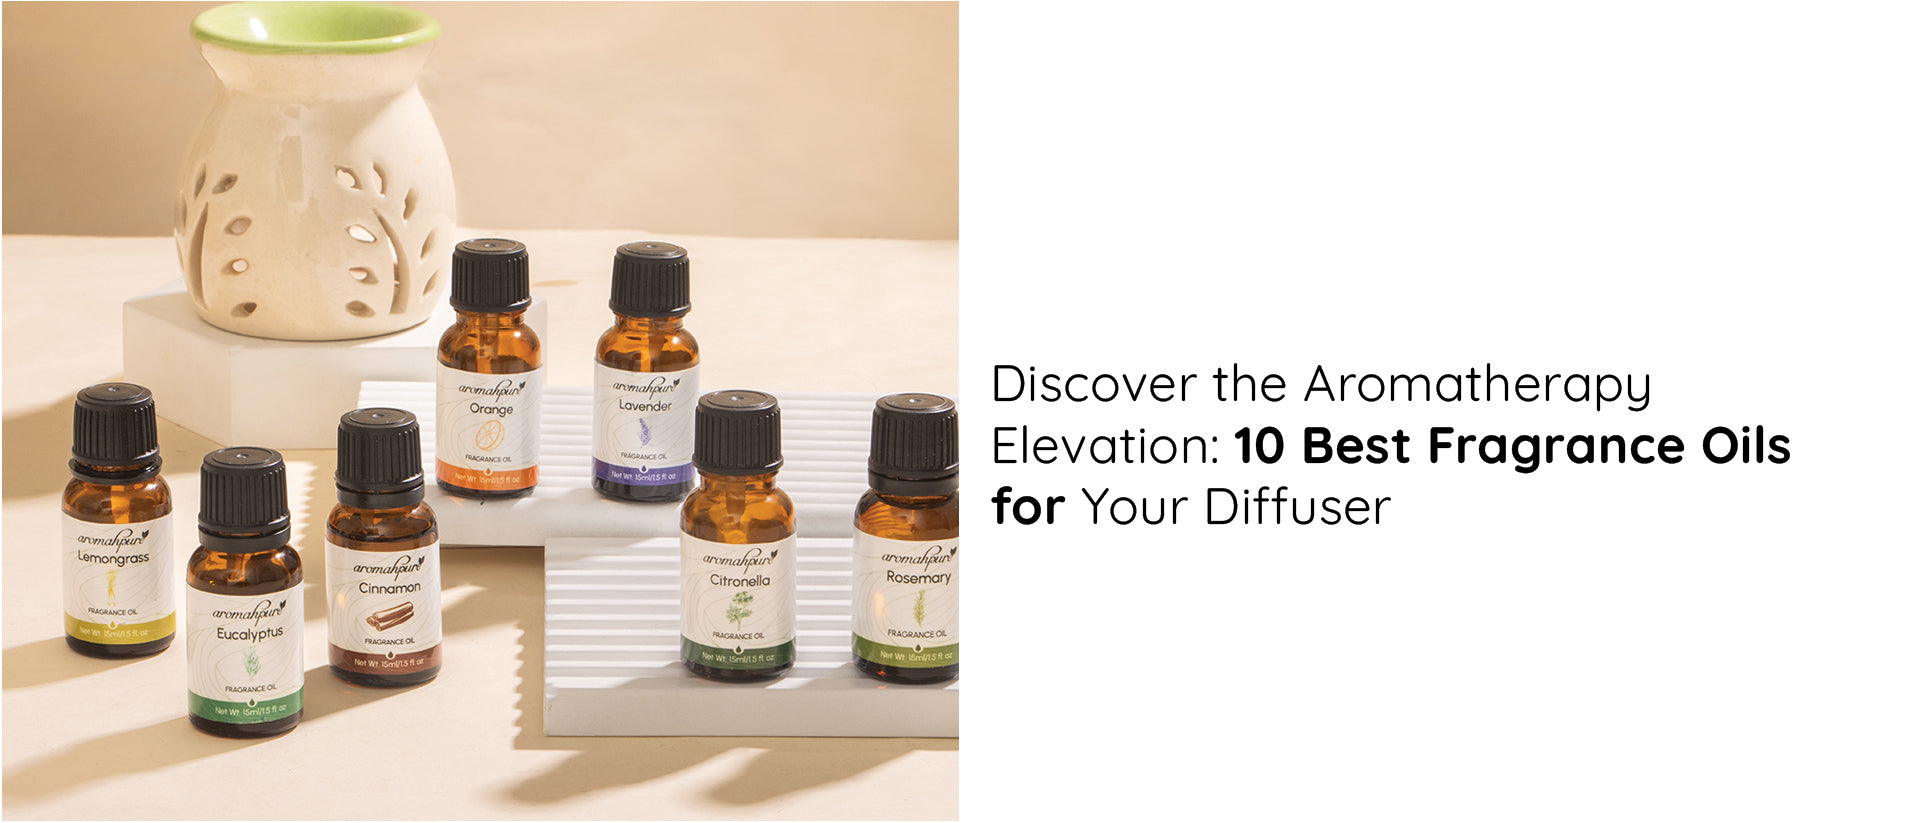 Discover the Aromatherapy Elevation: 10 Best Fragrance Oils for Your Diffuser